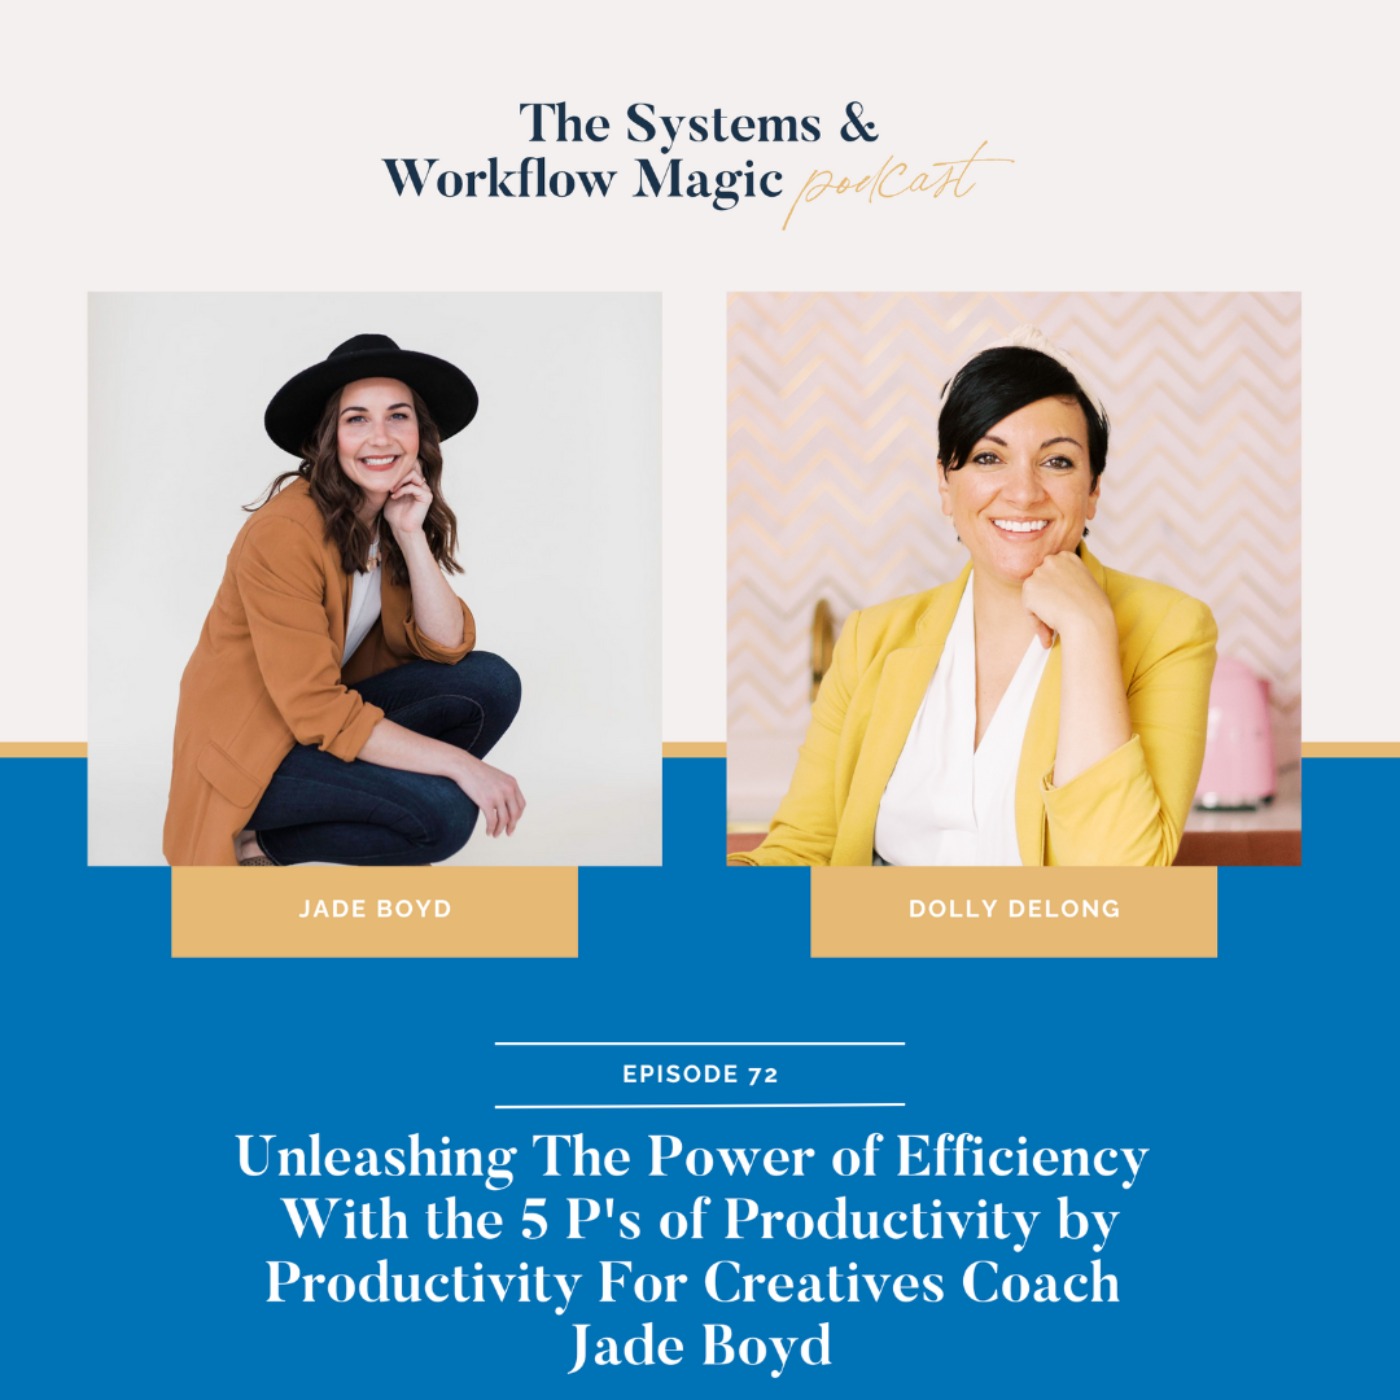 72: Unleashing The Power of Efficiency With the 5 P's of Productivity by Productivity for Creatives Coach Jade Boyd